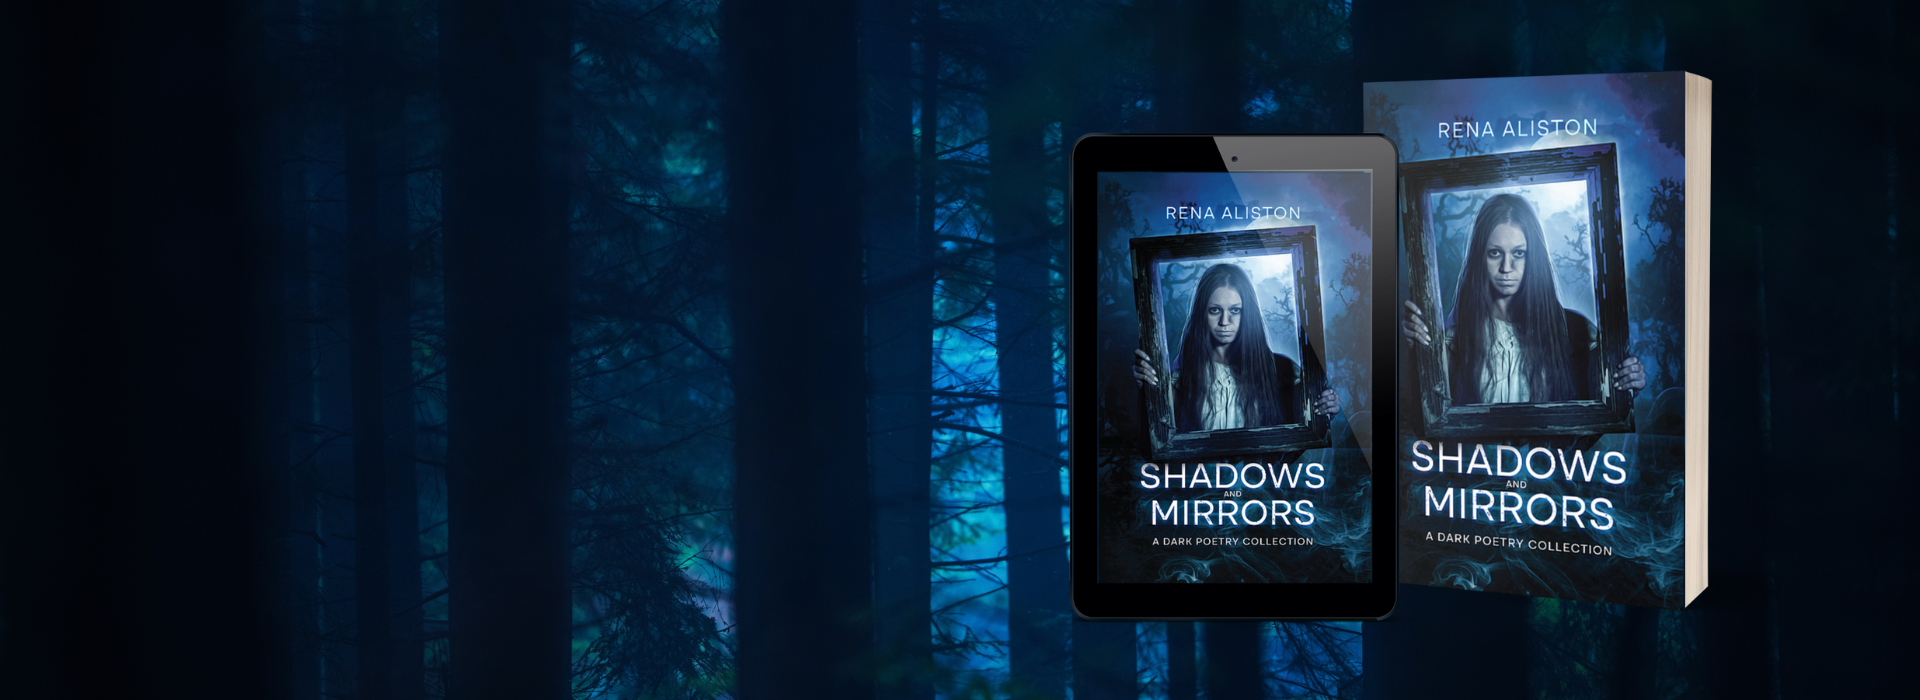 Shadows and Mirrors: A Dark Poetry Collection by Rena Aliston Out Now